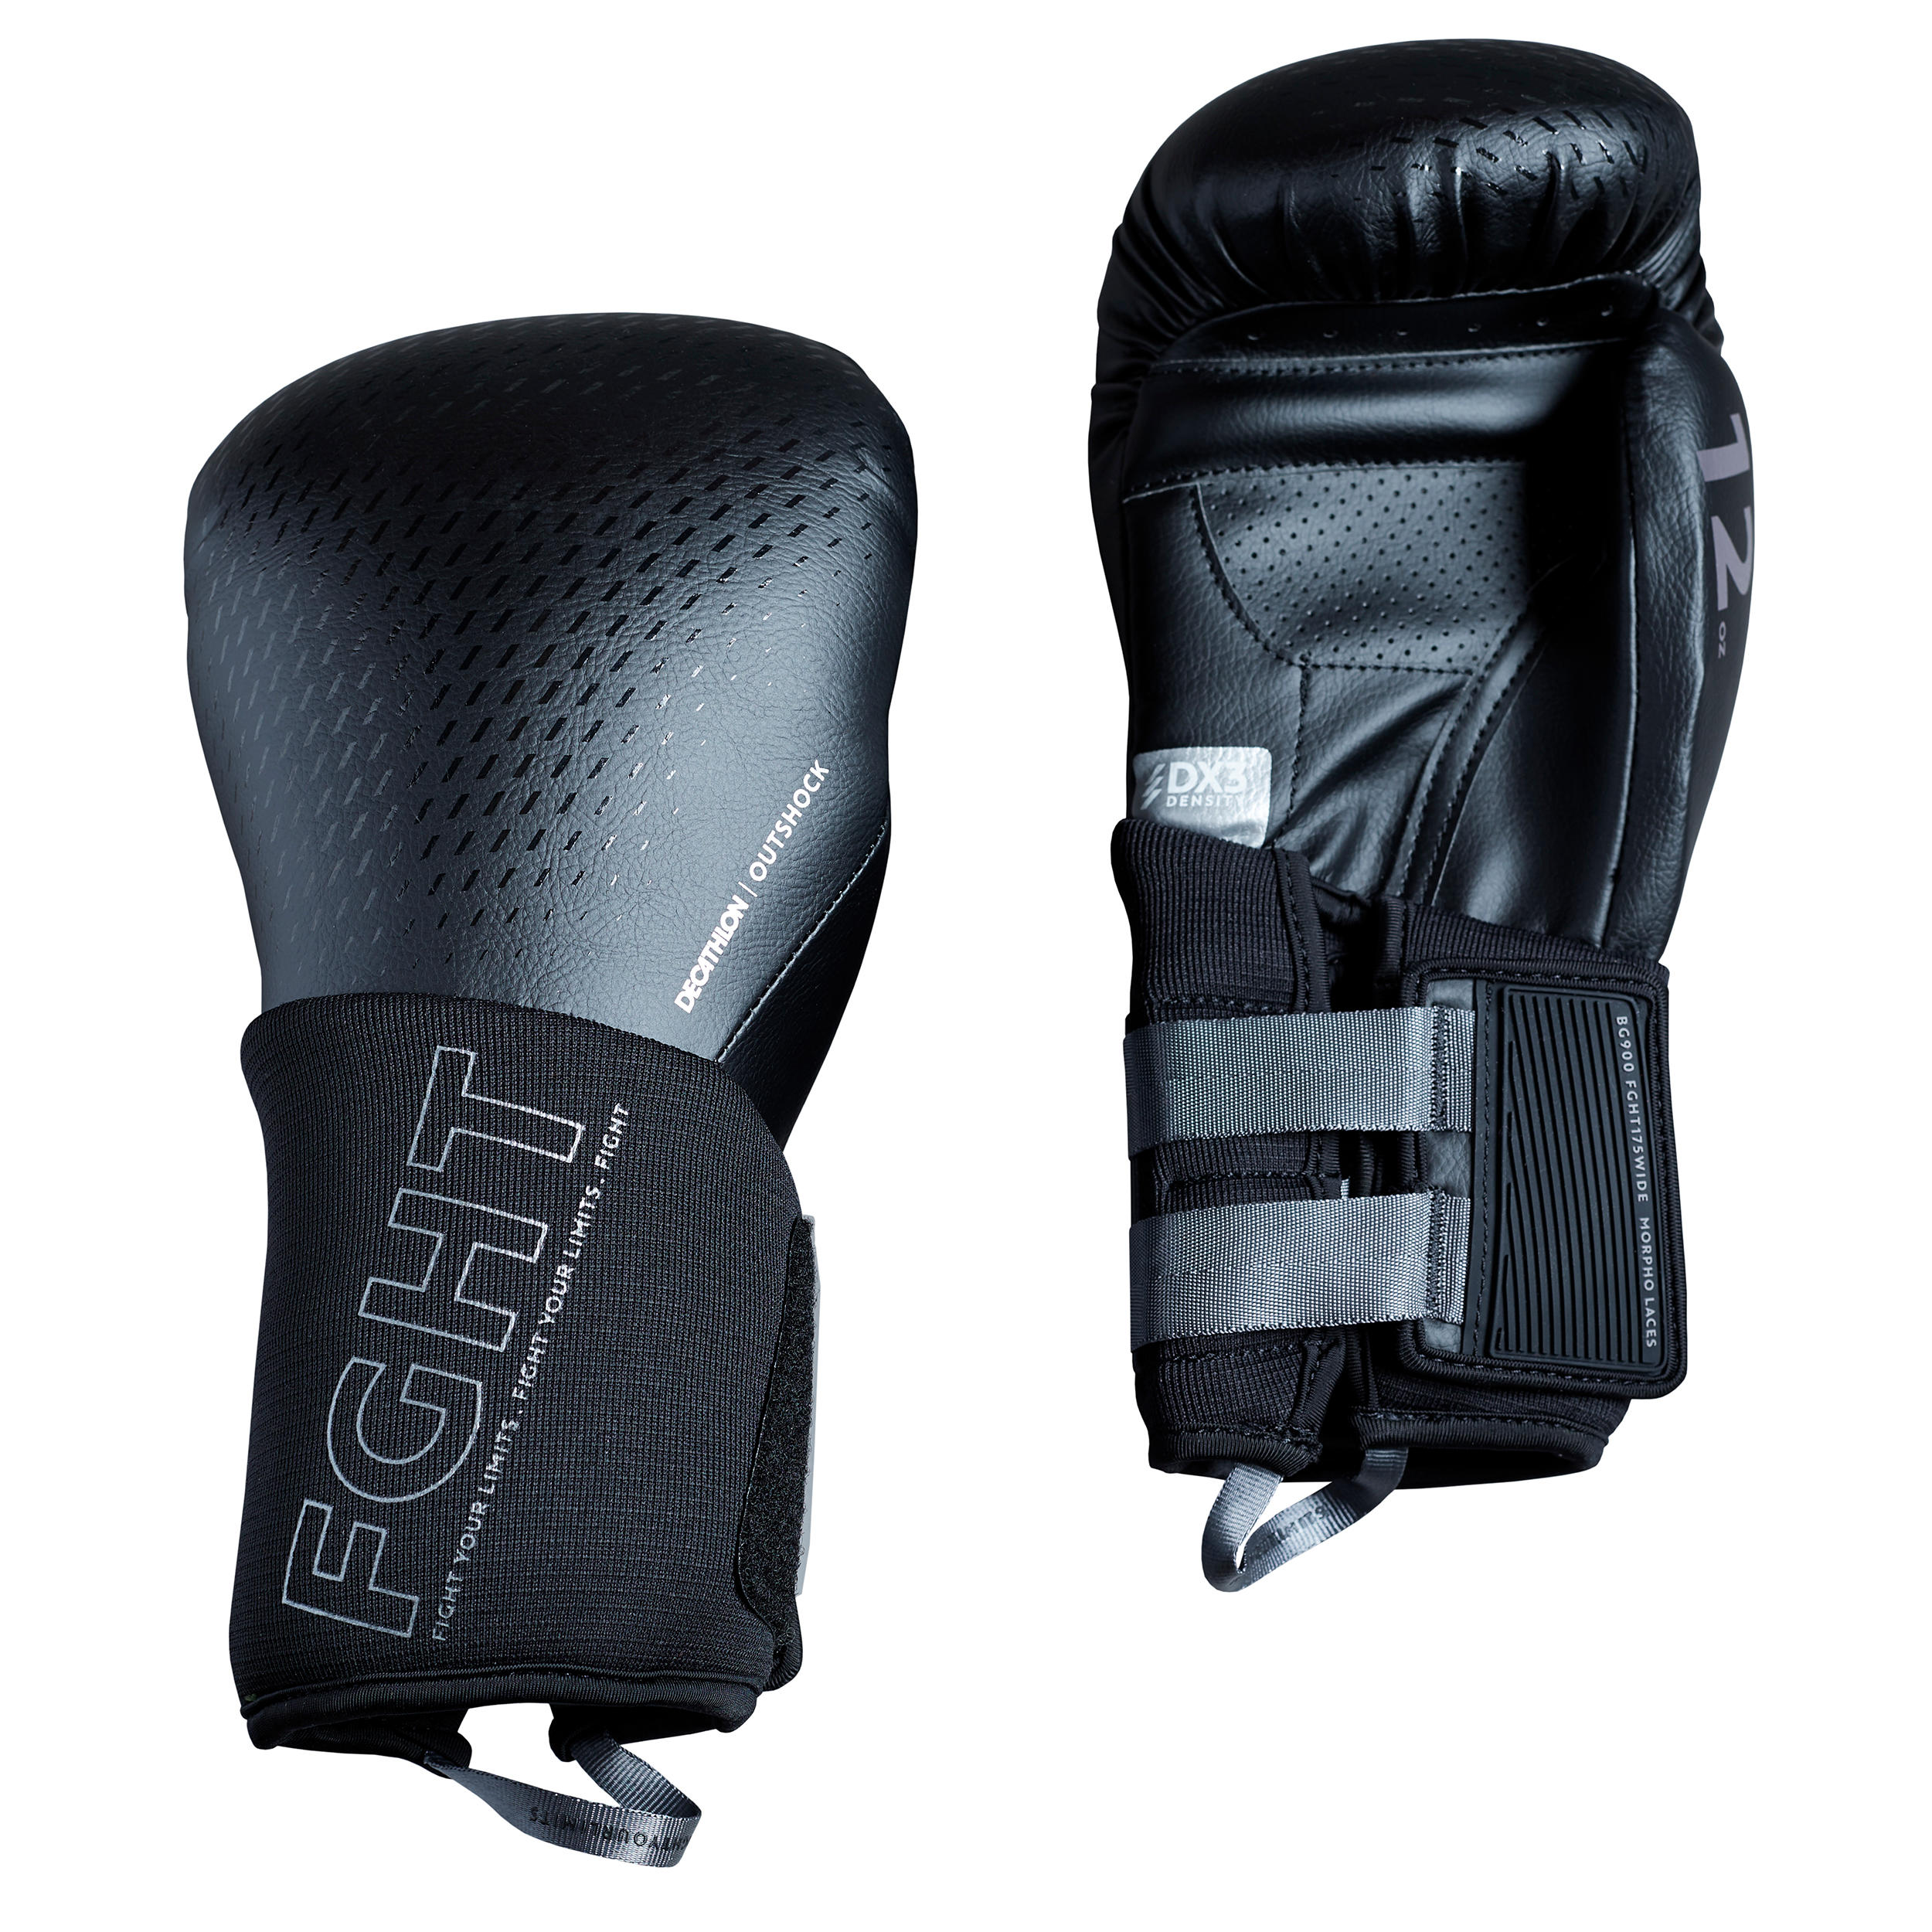 decathlon boxing gloves and pads